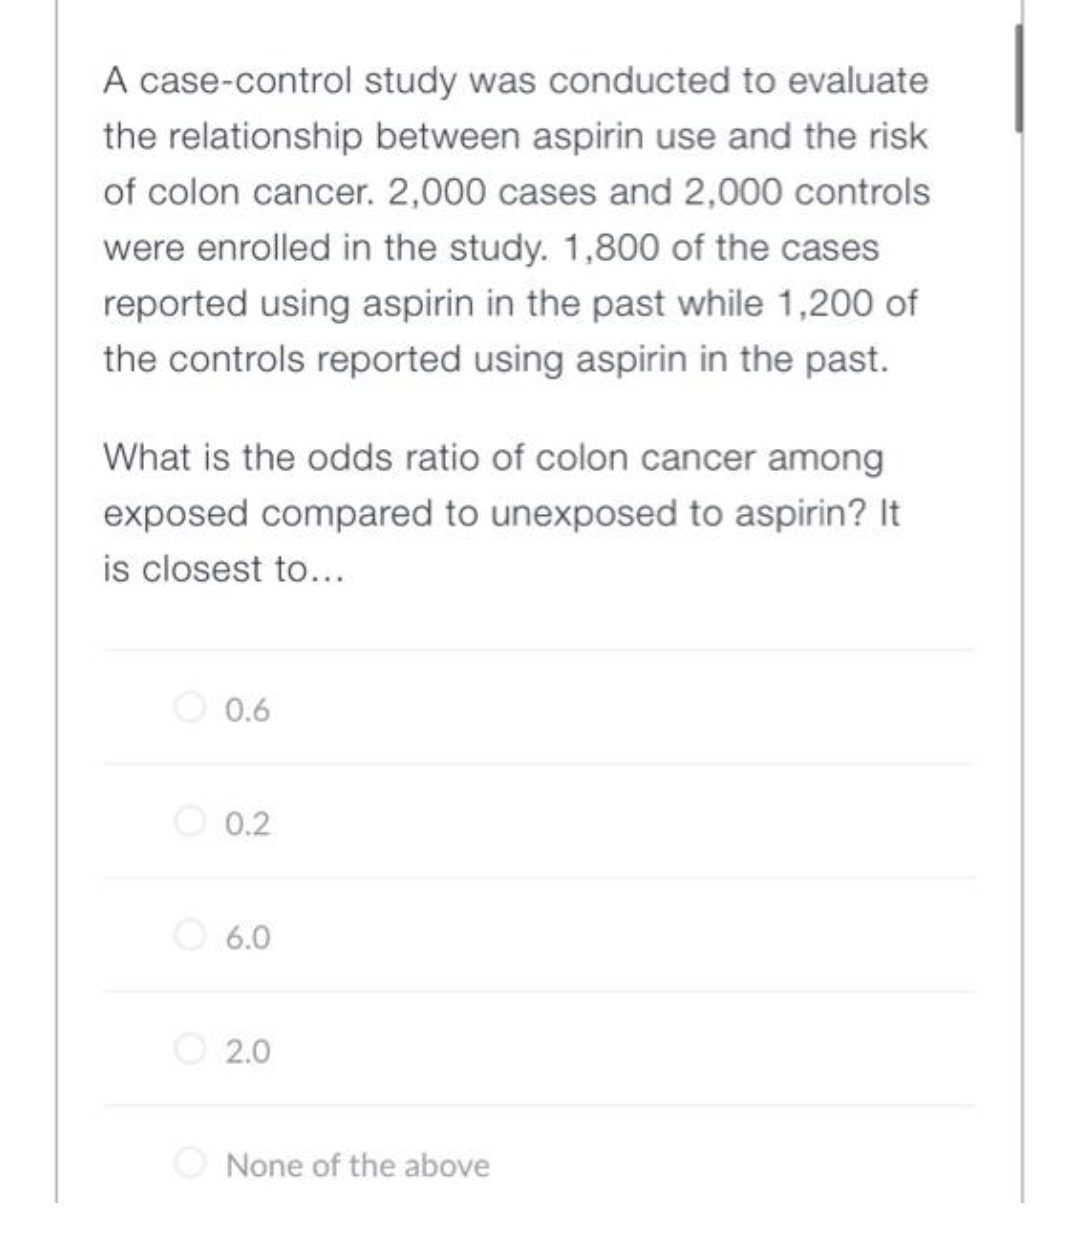 A case-control study was conducted to evaluate
the relationship between aspirin use and the risk
of colon cancer. 2,000 cases and 2,000 controls
were enrolled in the study. 1,800 of the cases
reported using aspirin in the past while 1,200 of
the controls reported using aspirin in the past.
What is the odds ratio of colon cancer among
exposed compared to unexposed to aspirin? It
is closest to...
O 0.6
O 0.2
O6.0
2.0
O None of the above
